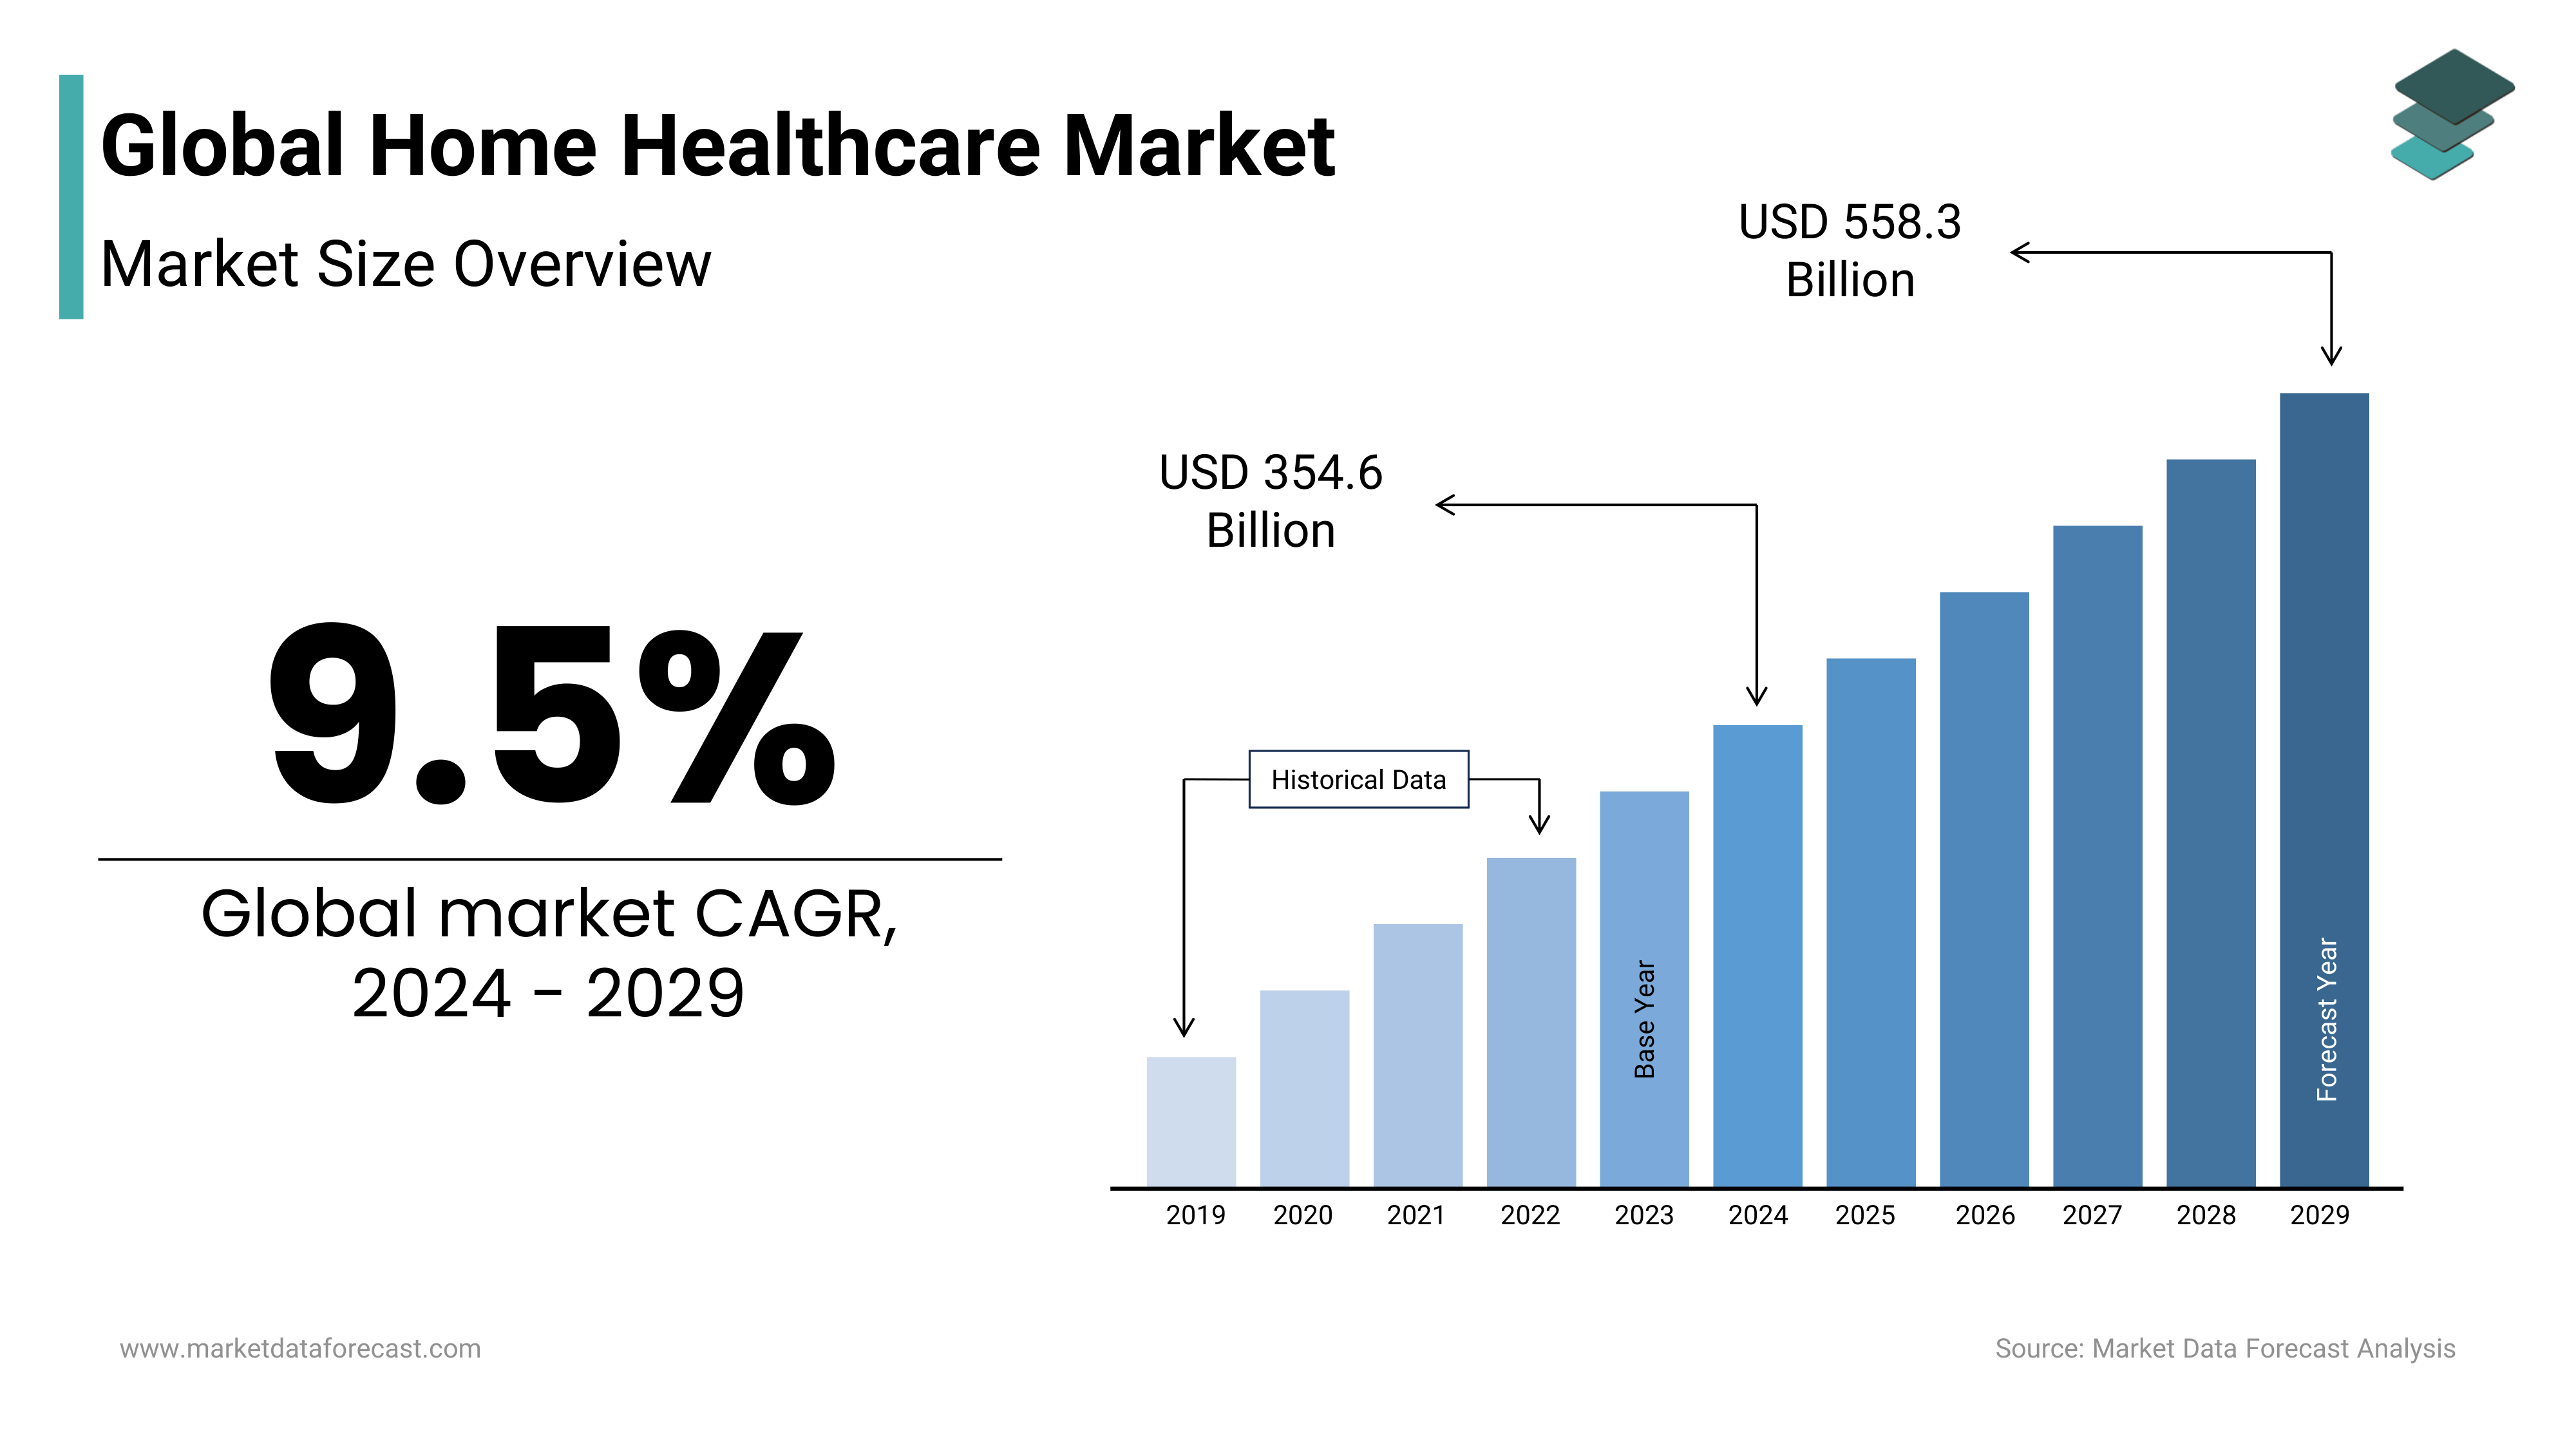 The global home healthcare market size to hit USD 558.3 billion by 2029